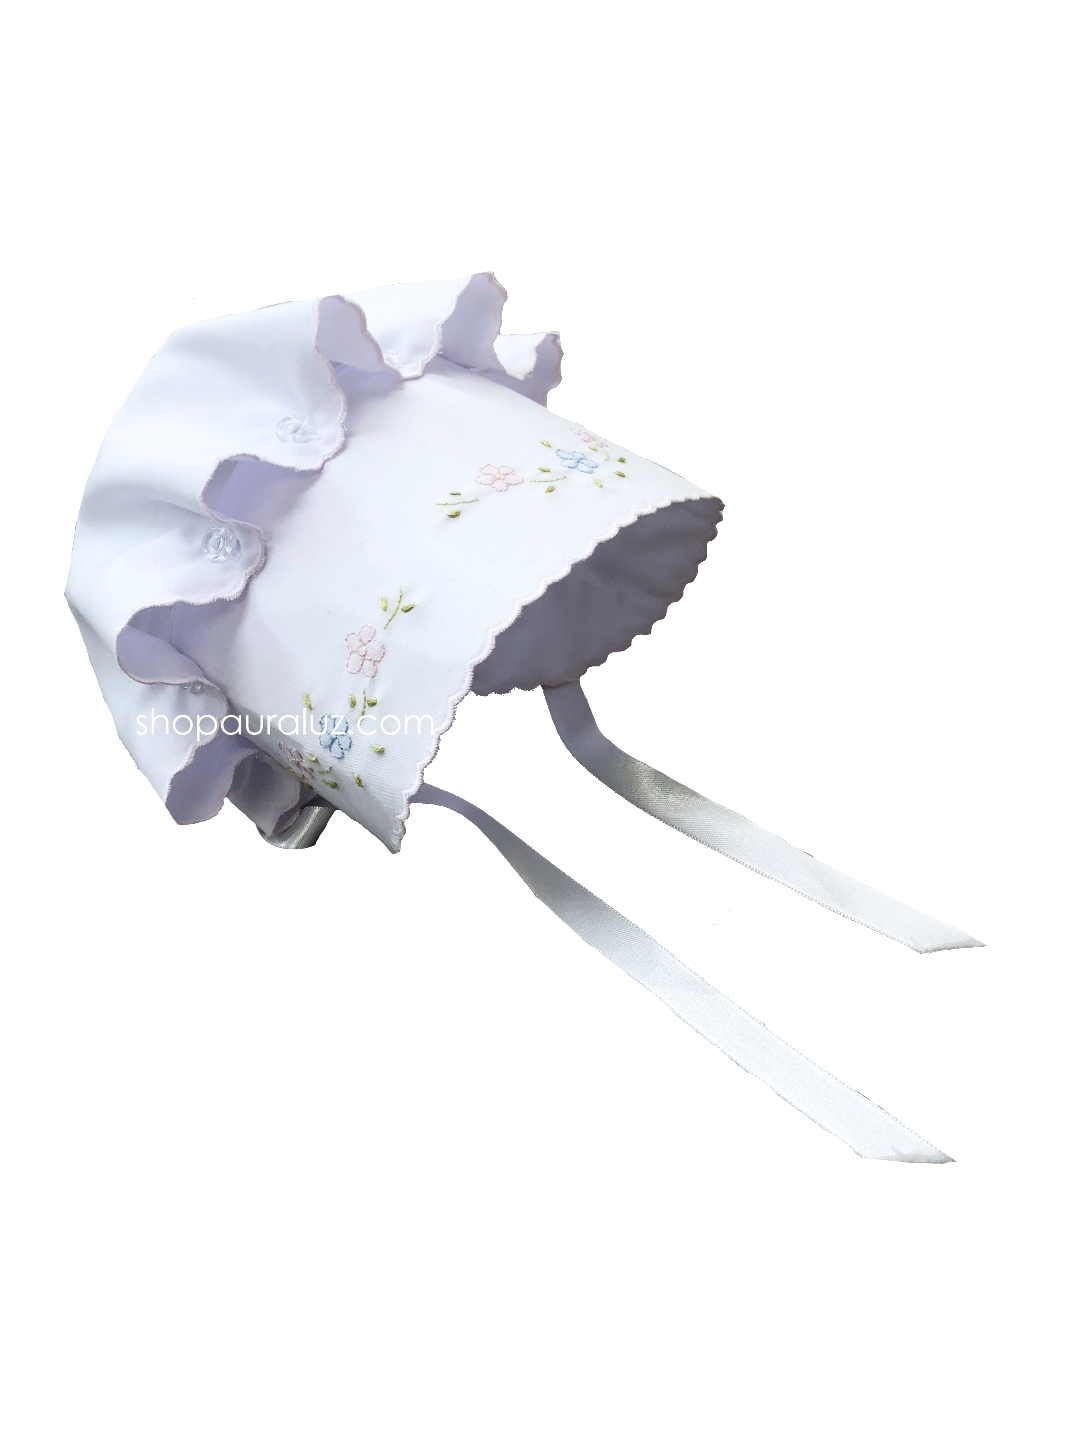 Auraluz Button Bonnet..White with pink scallop trim and embroidered flowers